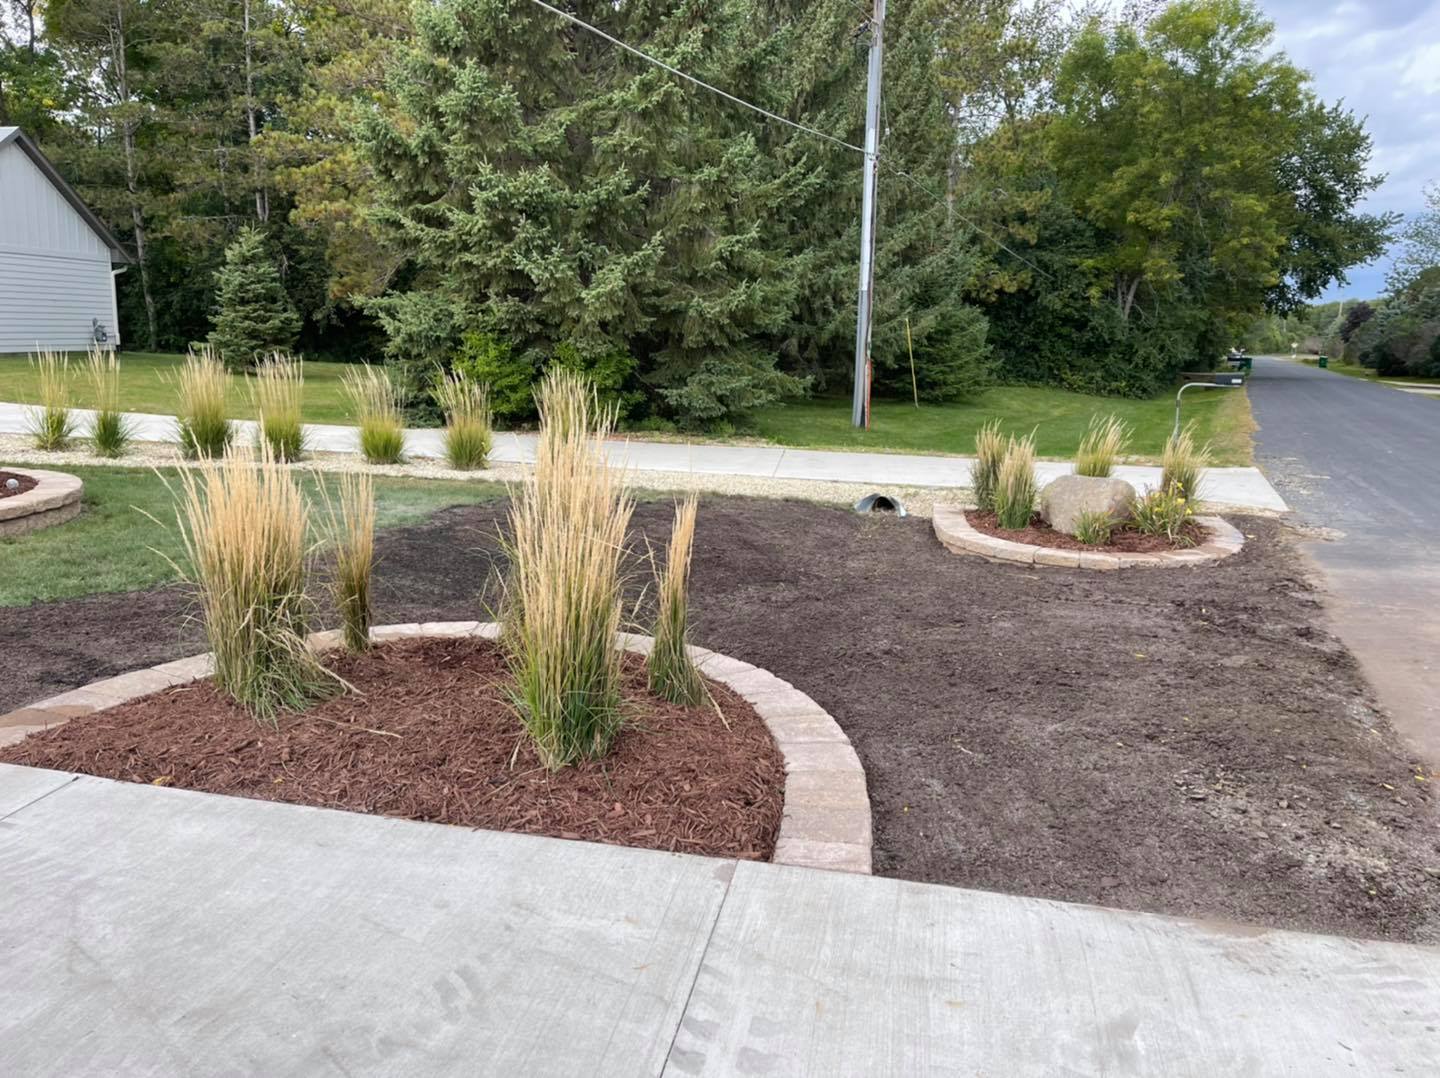 Front yard landscaping with ornamental grass, mulch & retaining walls